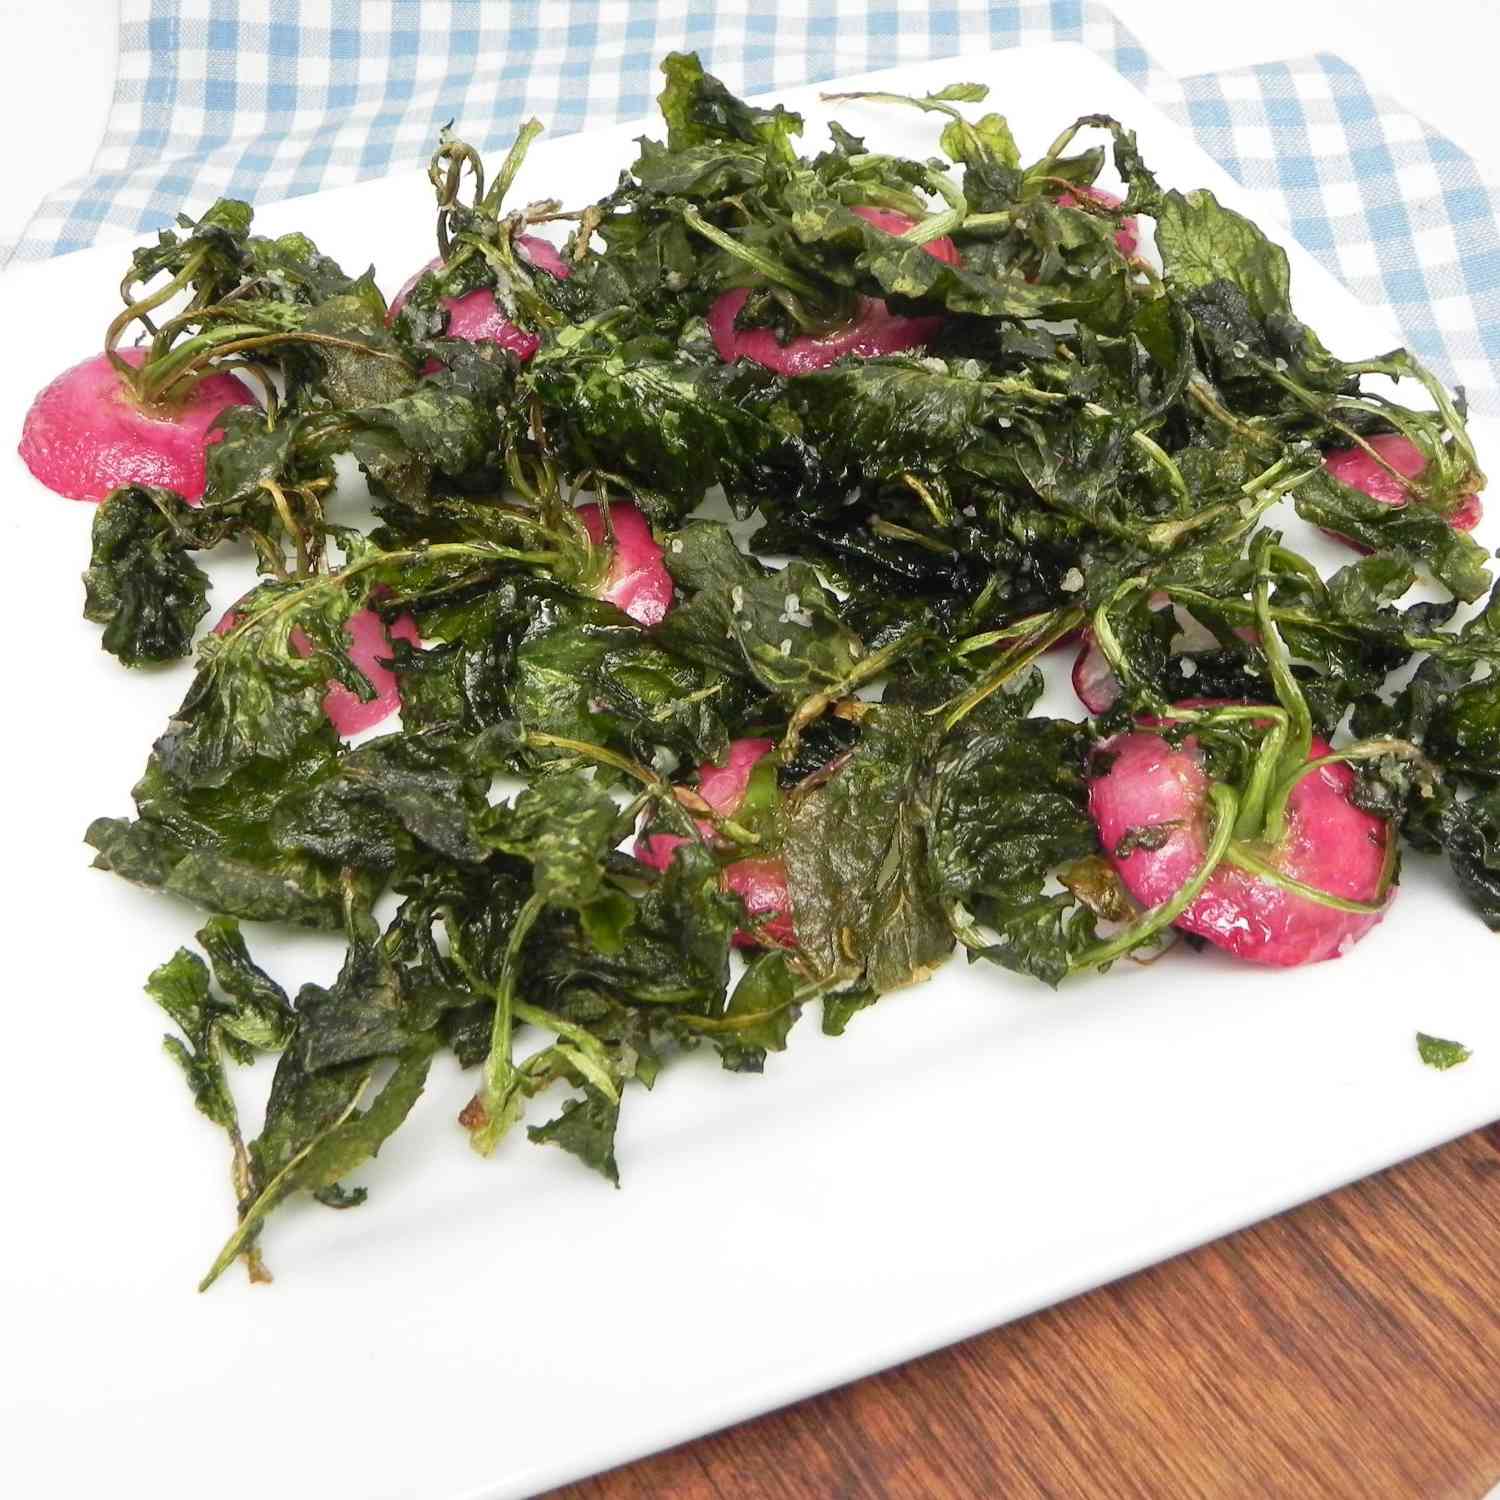 radish green chips on a plate